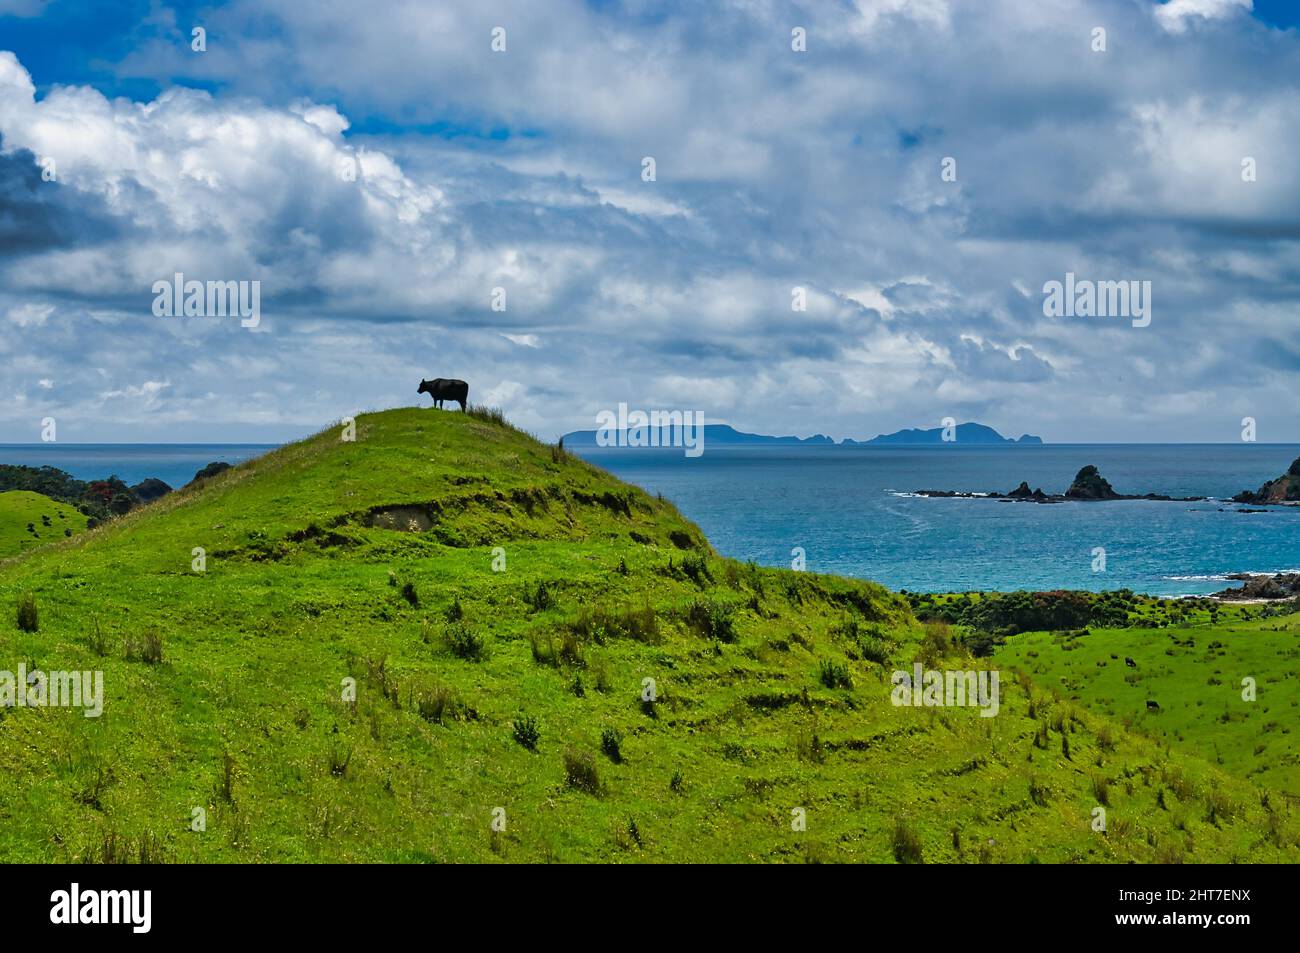 Cow on a hilltop on the  tip of Mimiwhangata Peninsula, on the east coast of North Island, New Zealand. Green meadow, sea and cloudscape. Stock Photo